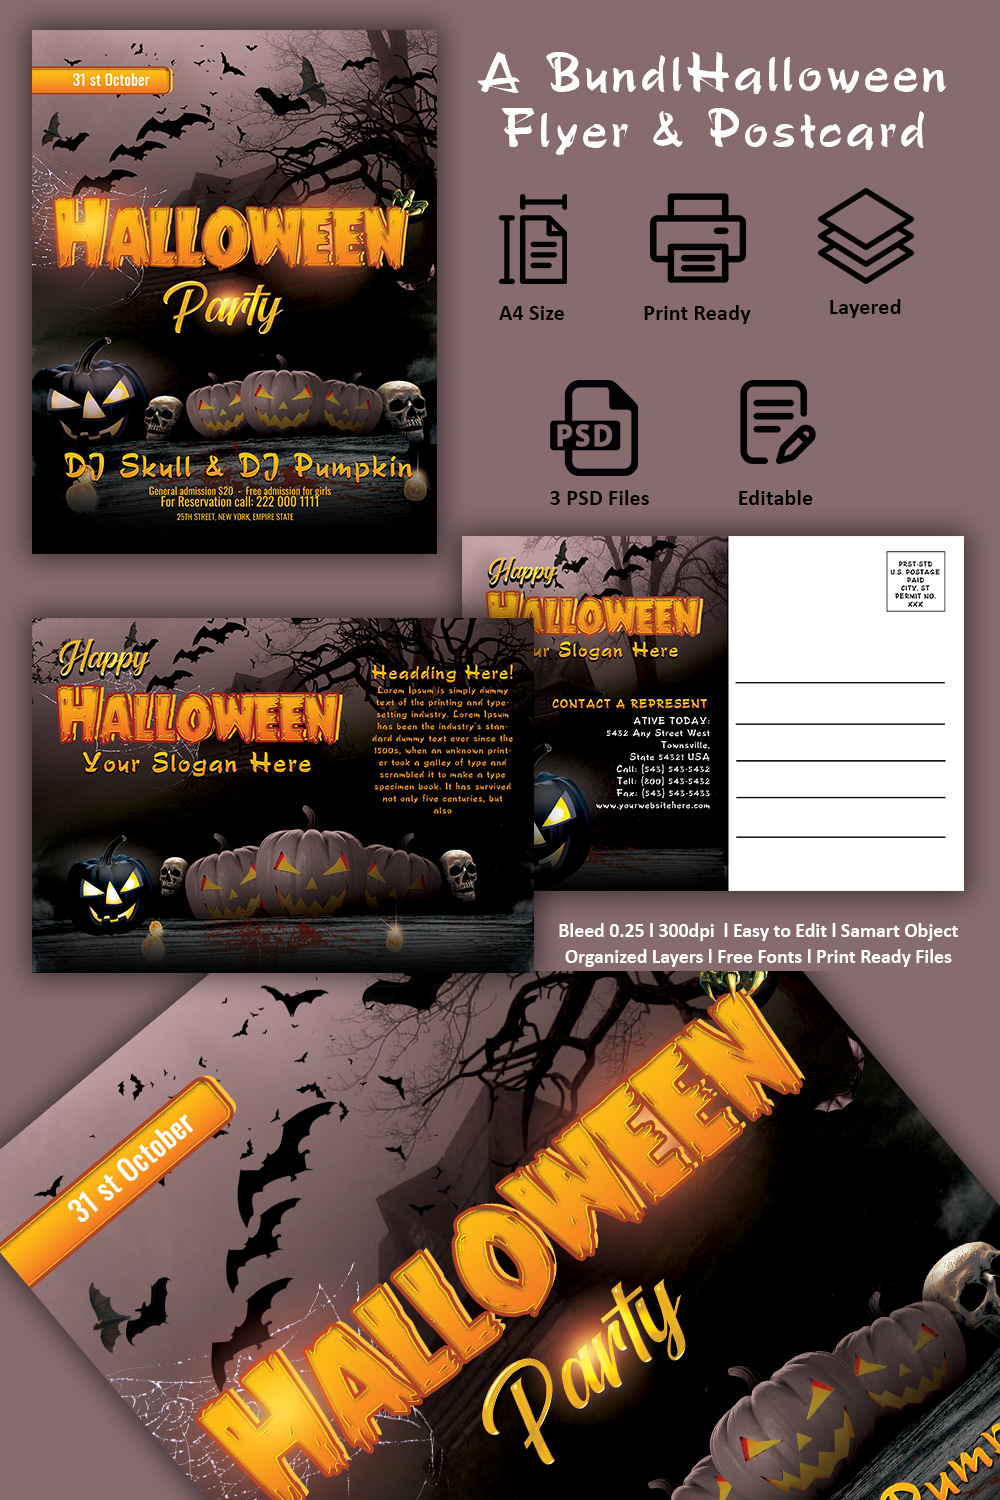 Halloween Party Flyer & Postcard Template Ready to Print